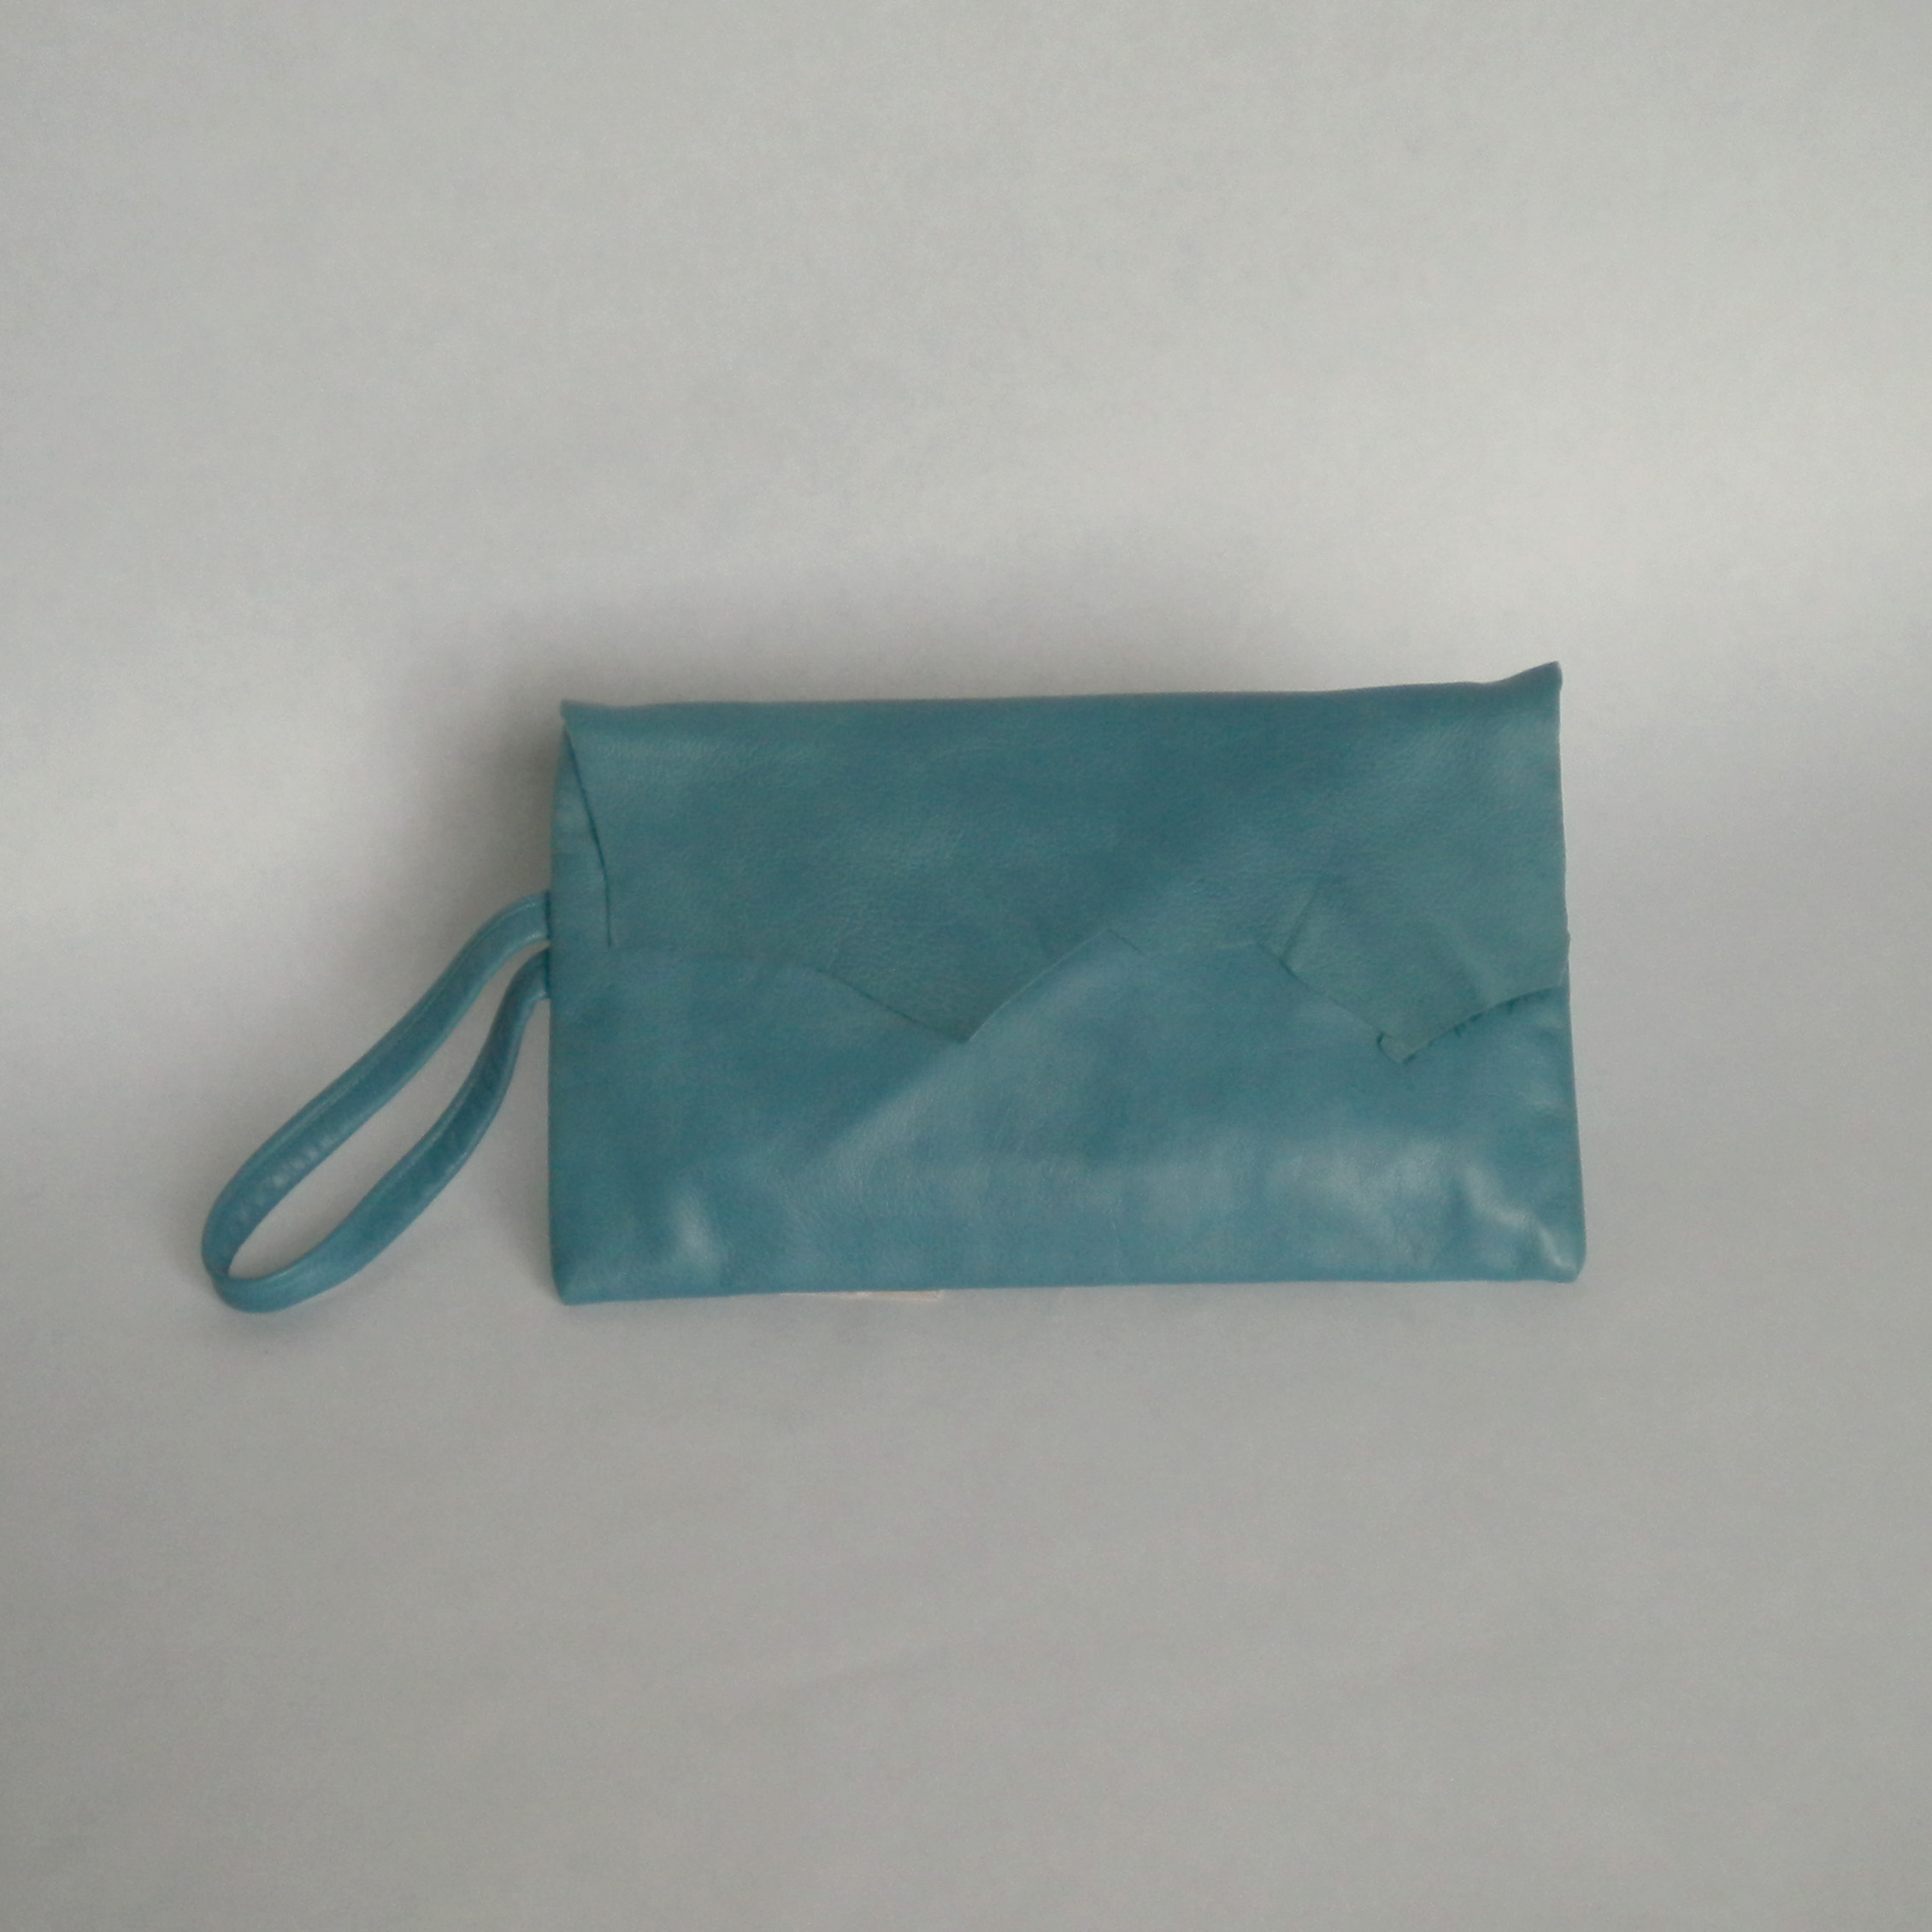  Blue leather clutch